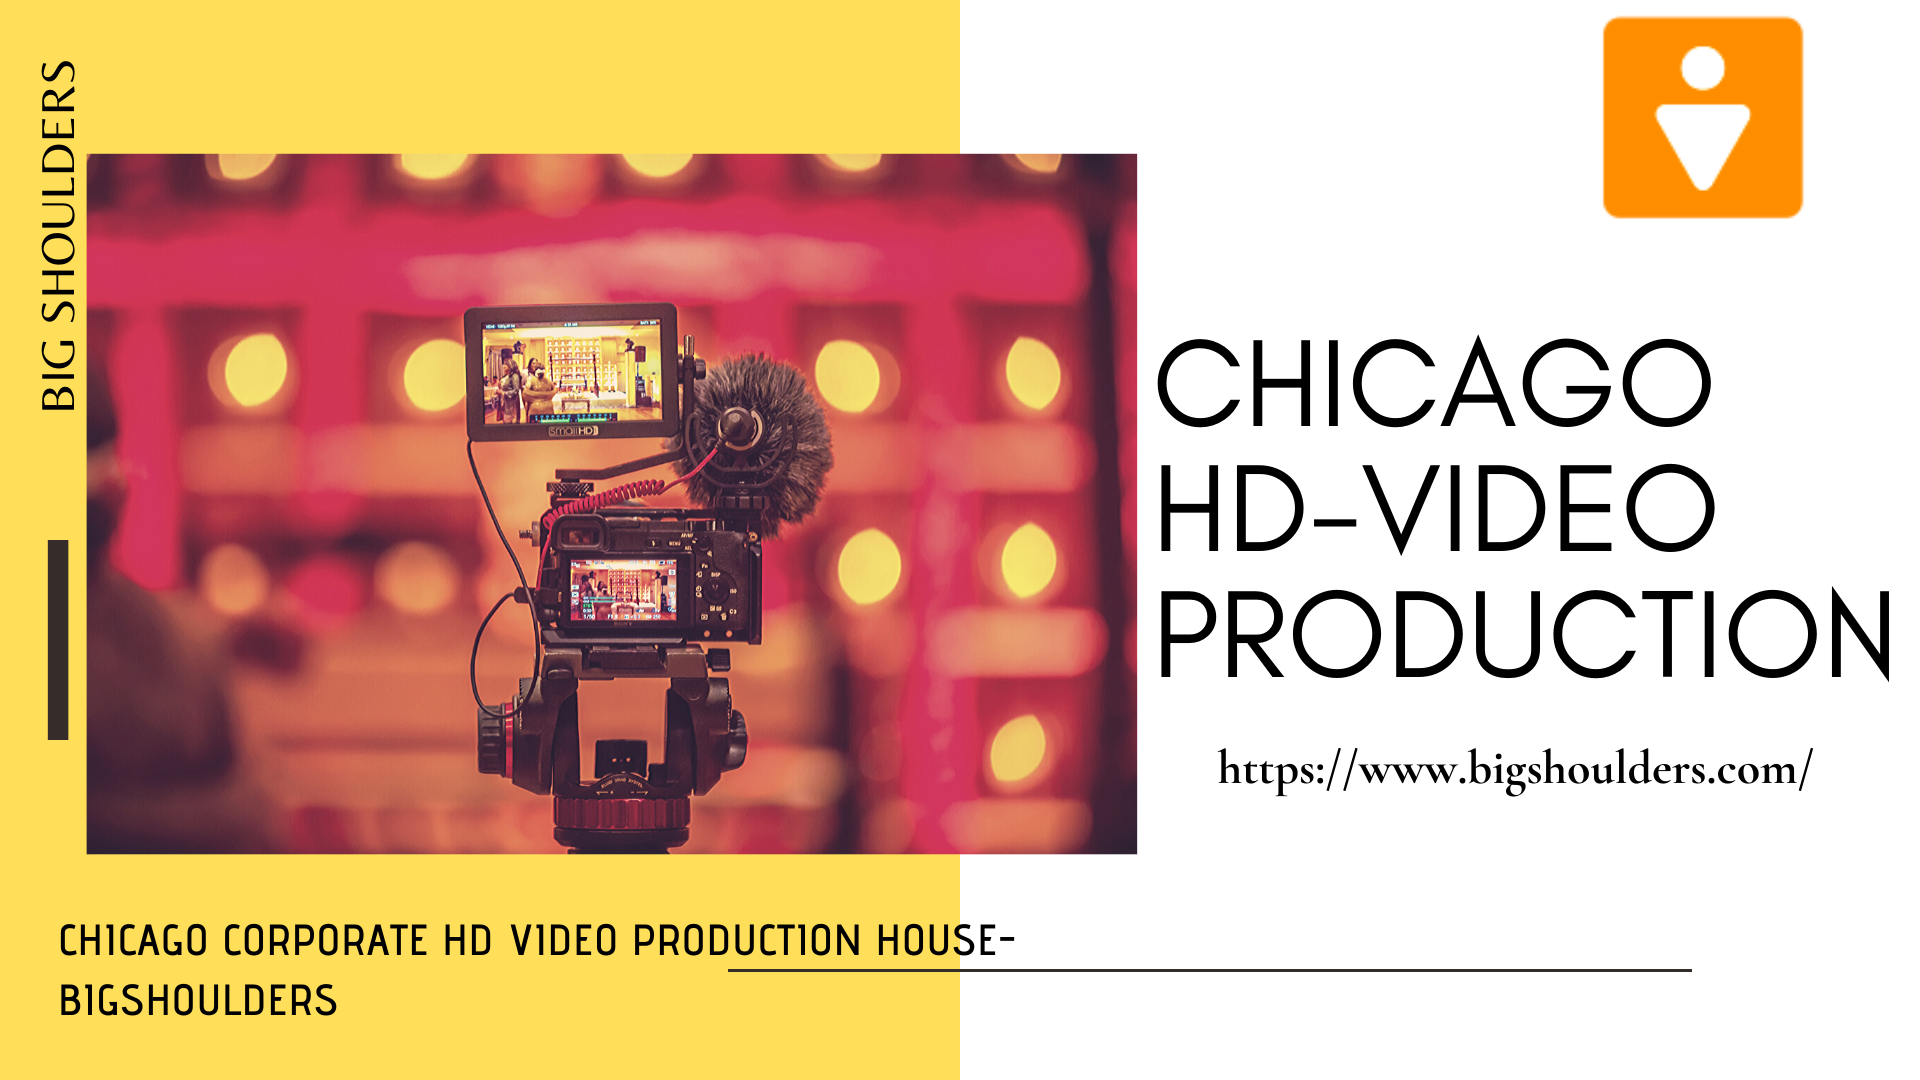 Why Chicago Is Considered To Be The Place For Video Production?